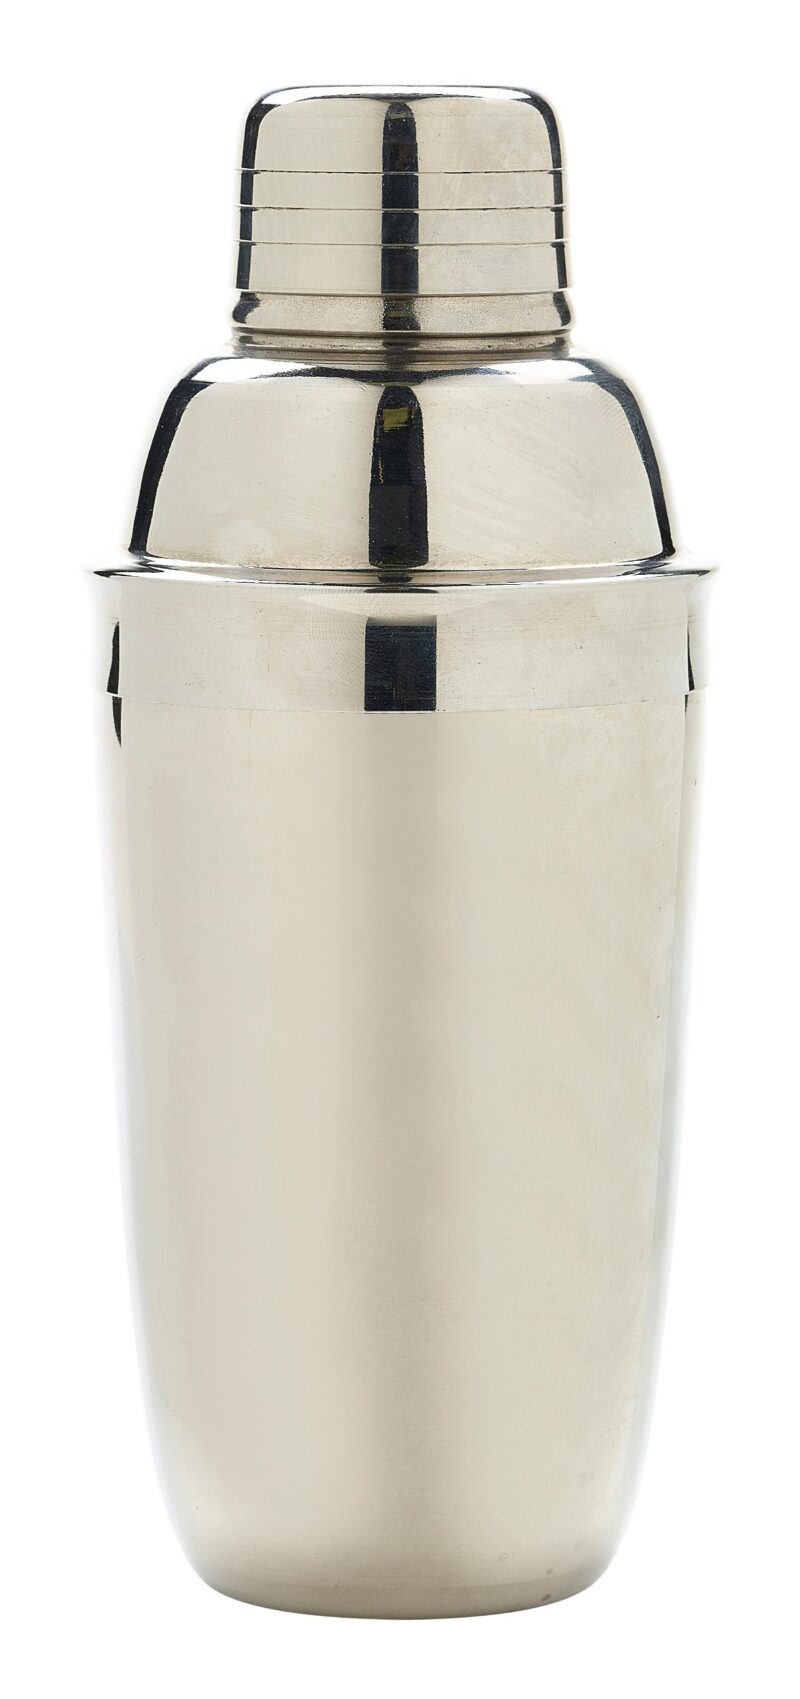 Cocktail Shaker 23cl/8oz - Small for Single Serves